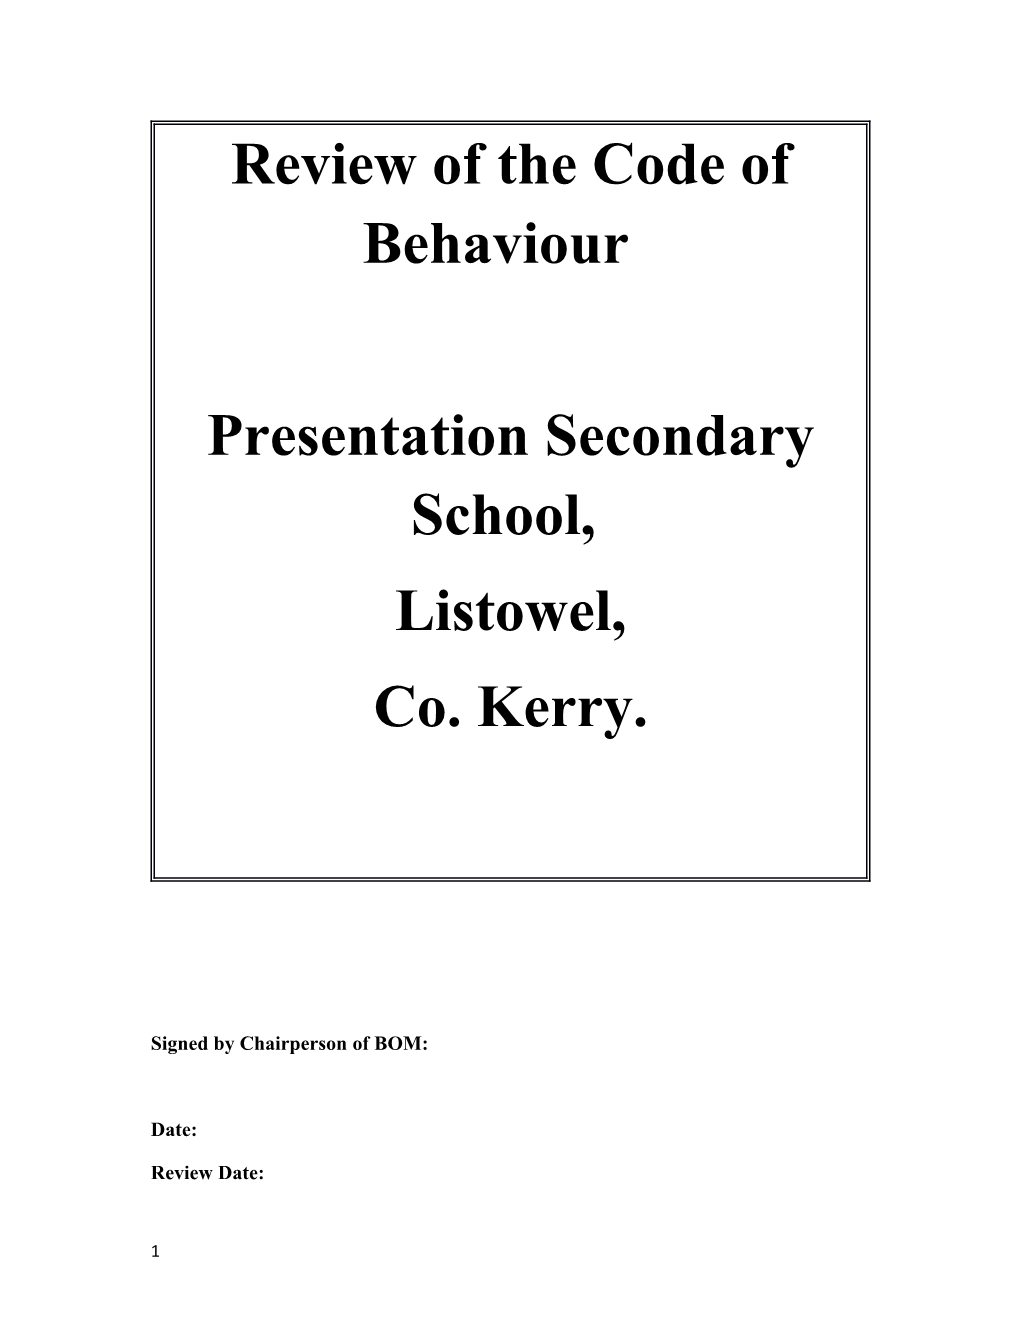 Review of the Code of Behaviour